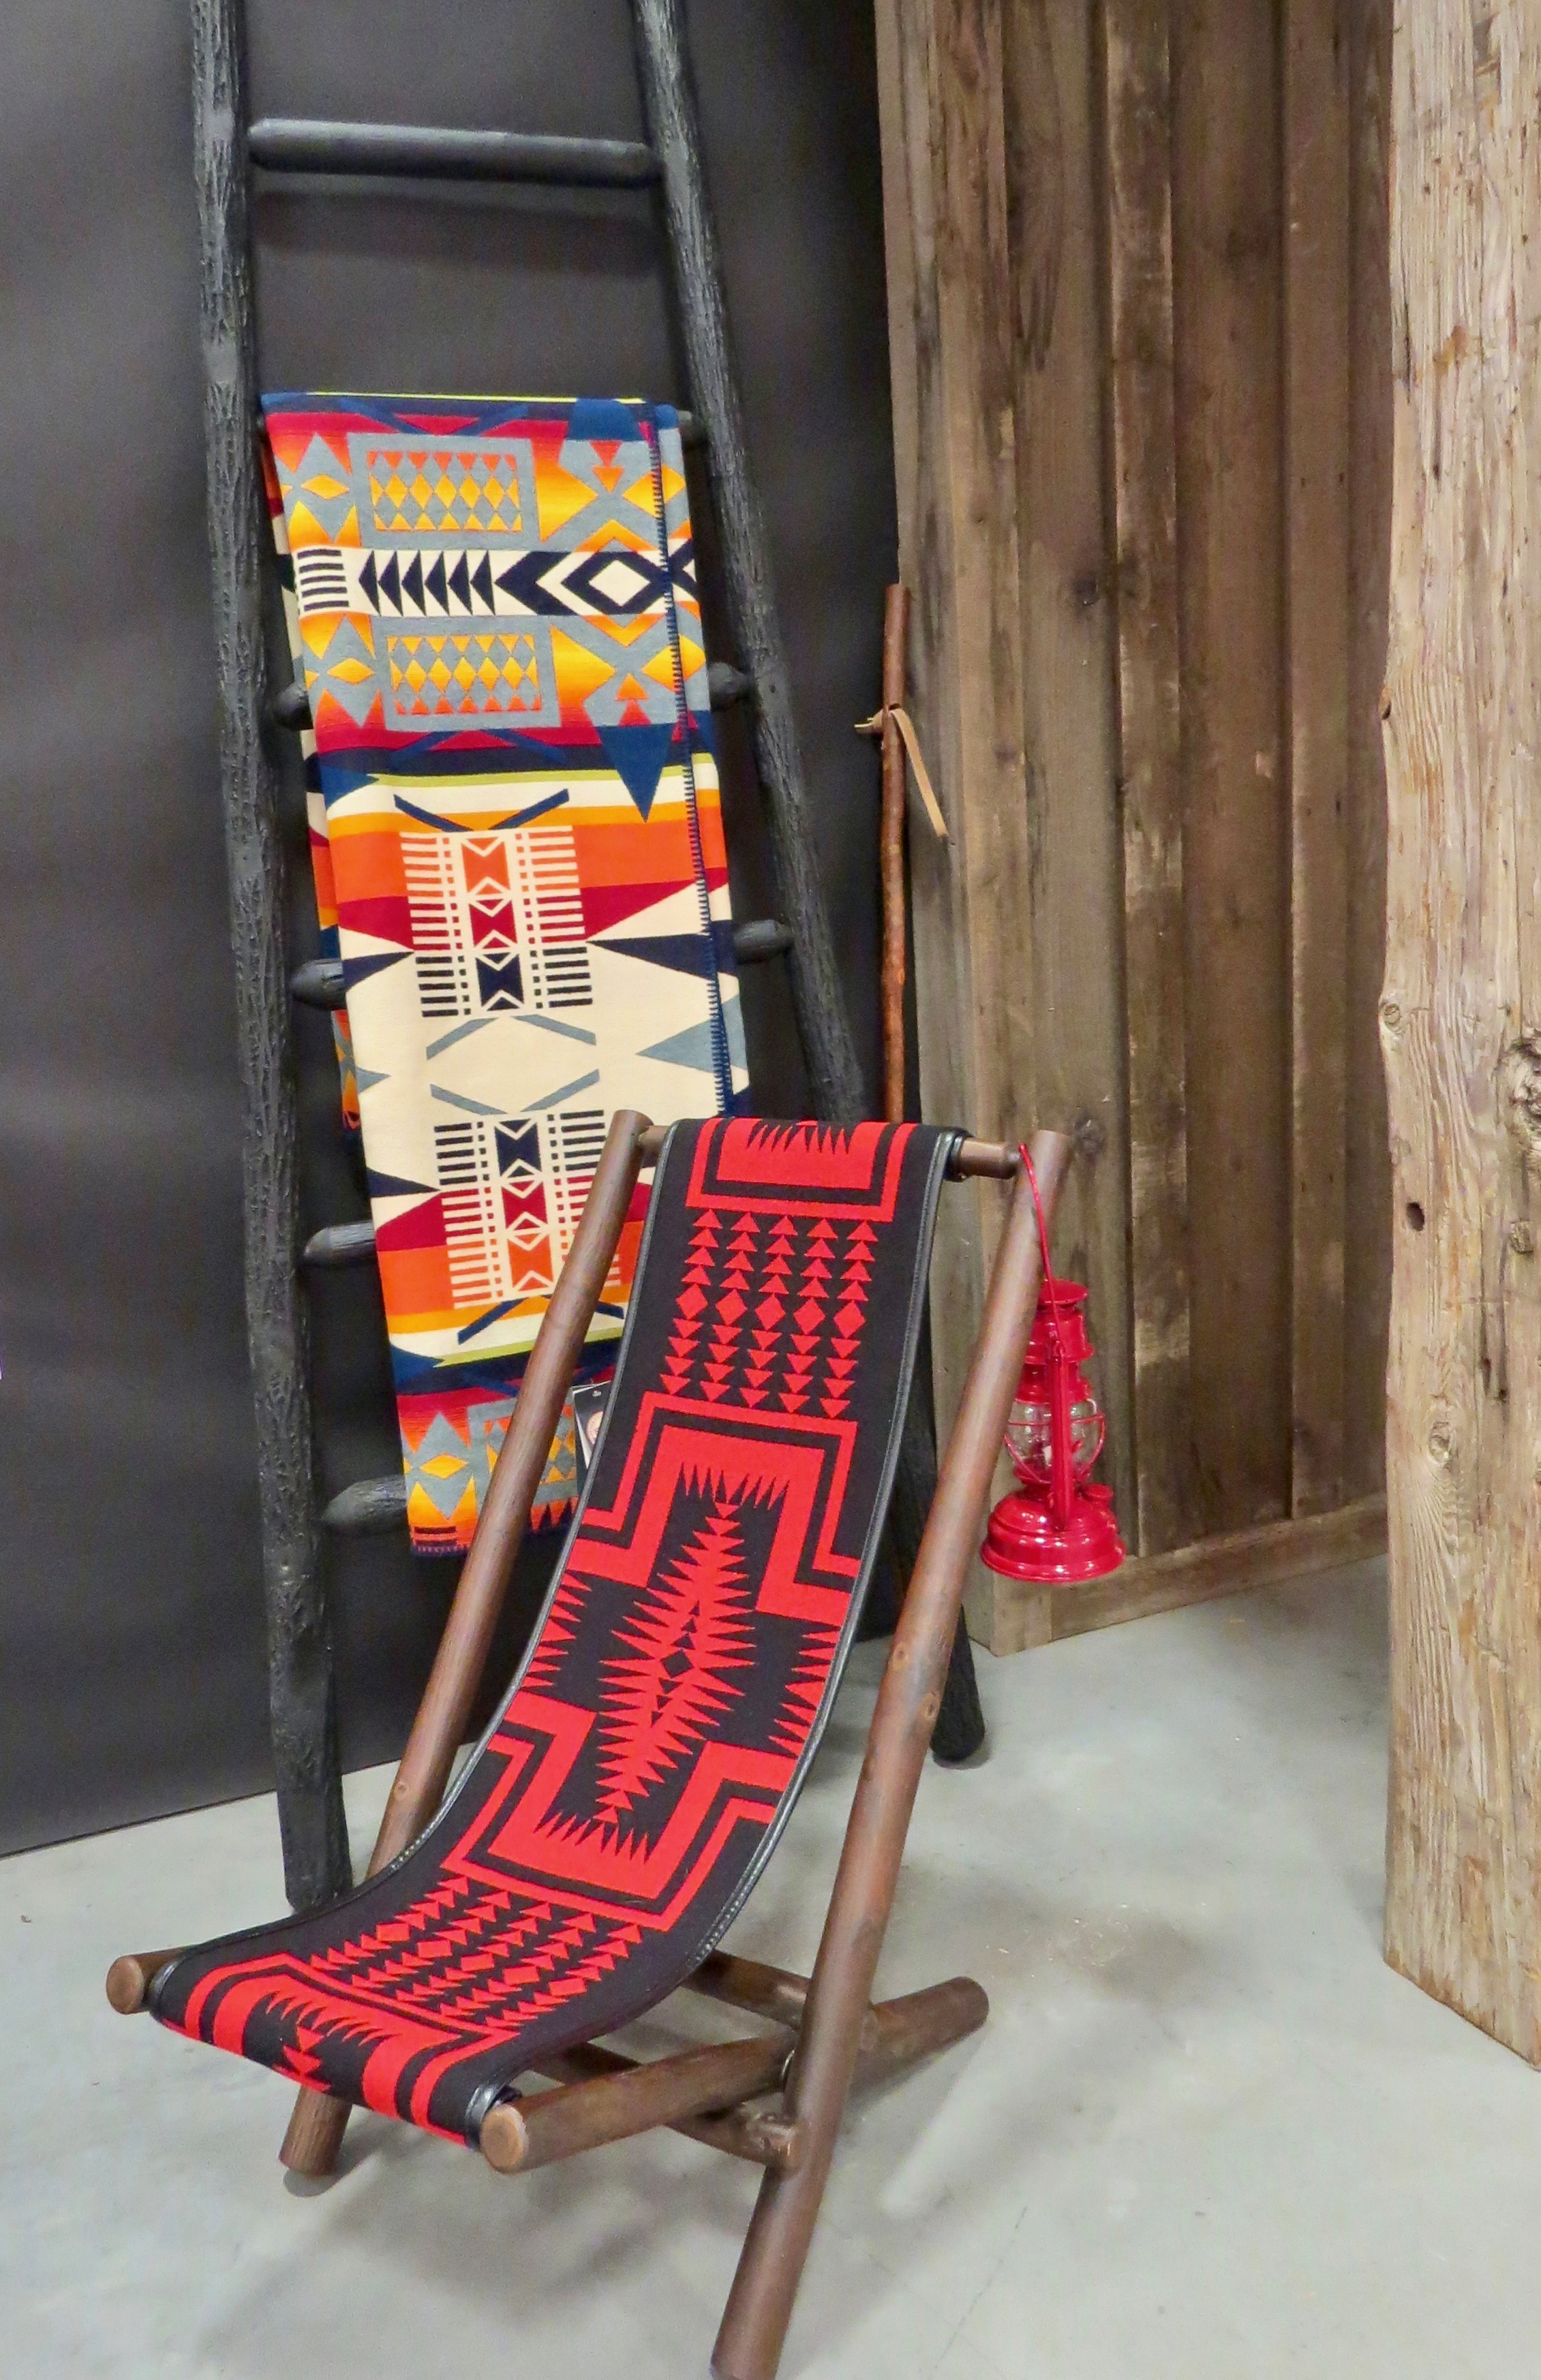 Old Hickory Furniture collaborated with Pendleton to create spectacular furniture pieces for the annual Designer Show House at the 2019 Western Design Exhibit + Sale in Jackson Hole, Wyoming.